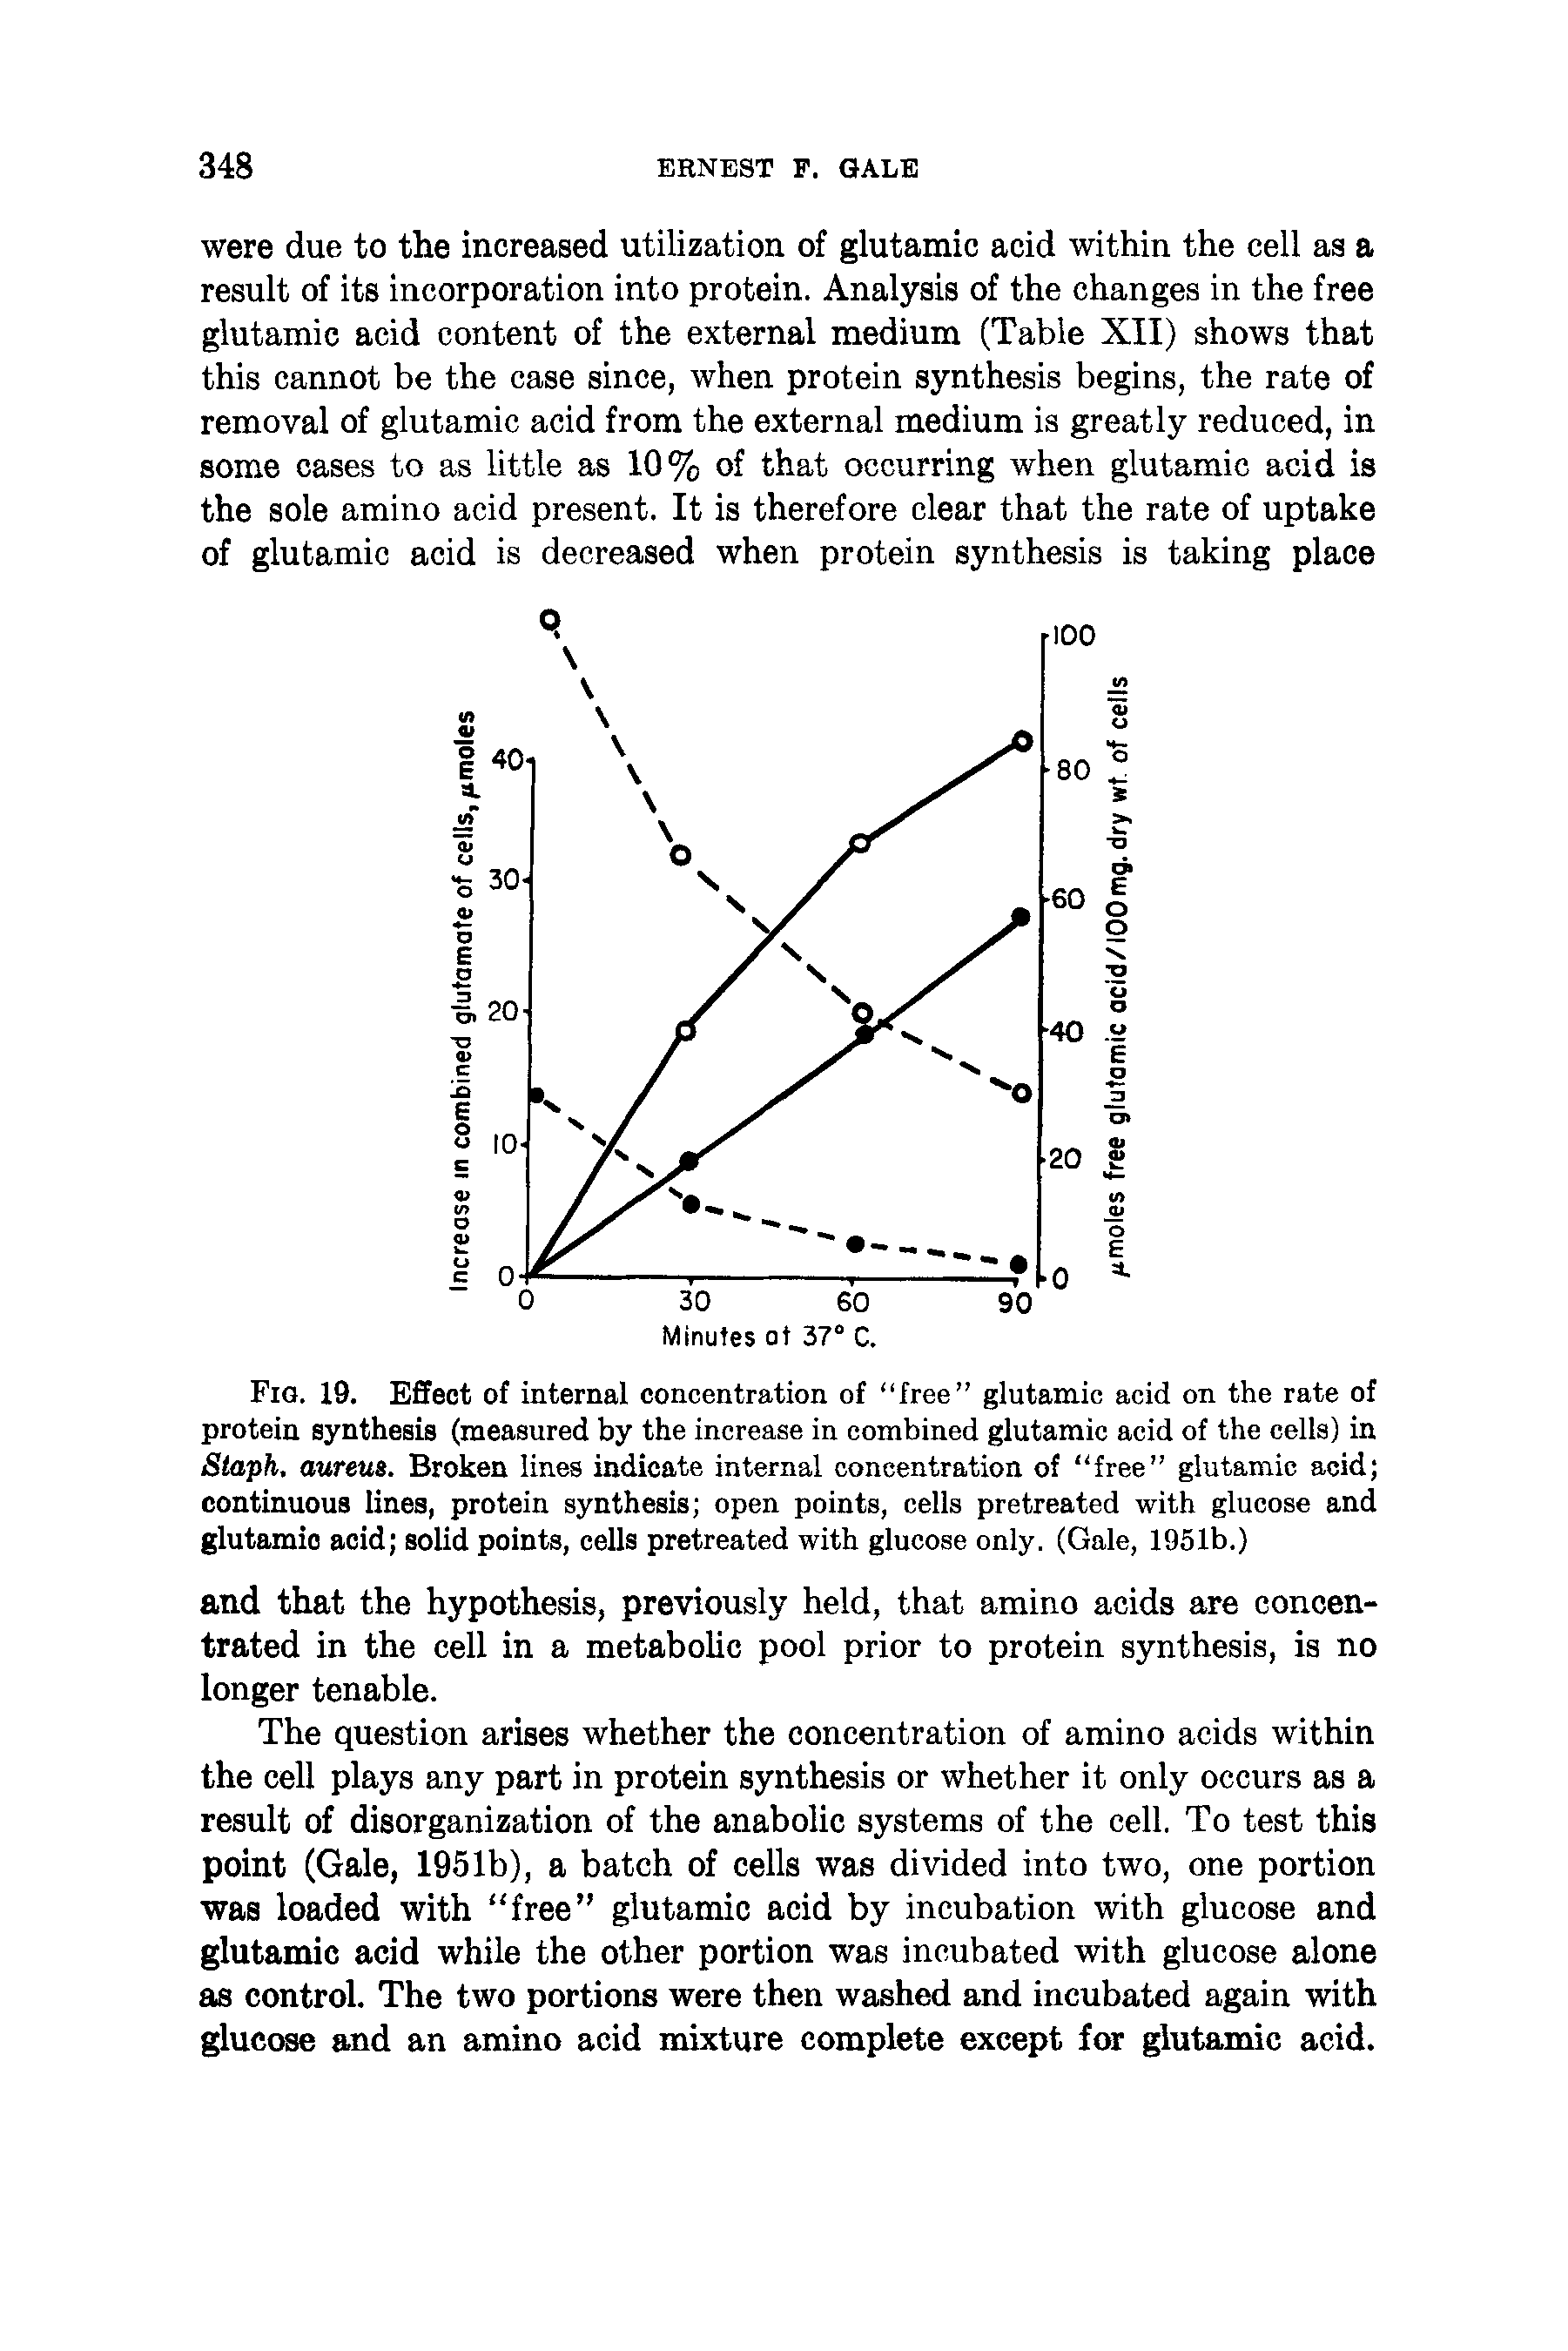 Fig. 19. Effect of internal concentration of free glutamic acid on the rate of protein synthesis (measured by the increase in combined glutamic acid of the cells) in Staph, aureus. Broken lines indicate internal concentration of free glutamic acid continuous lines, protein synthesis open points, cells pretreated with glucose and glutamic acid solid points, cells pretreated with glucose only. (Gale, 1951b.)...